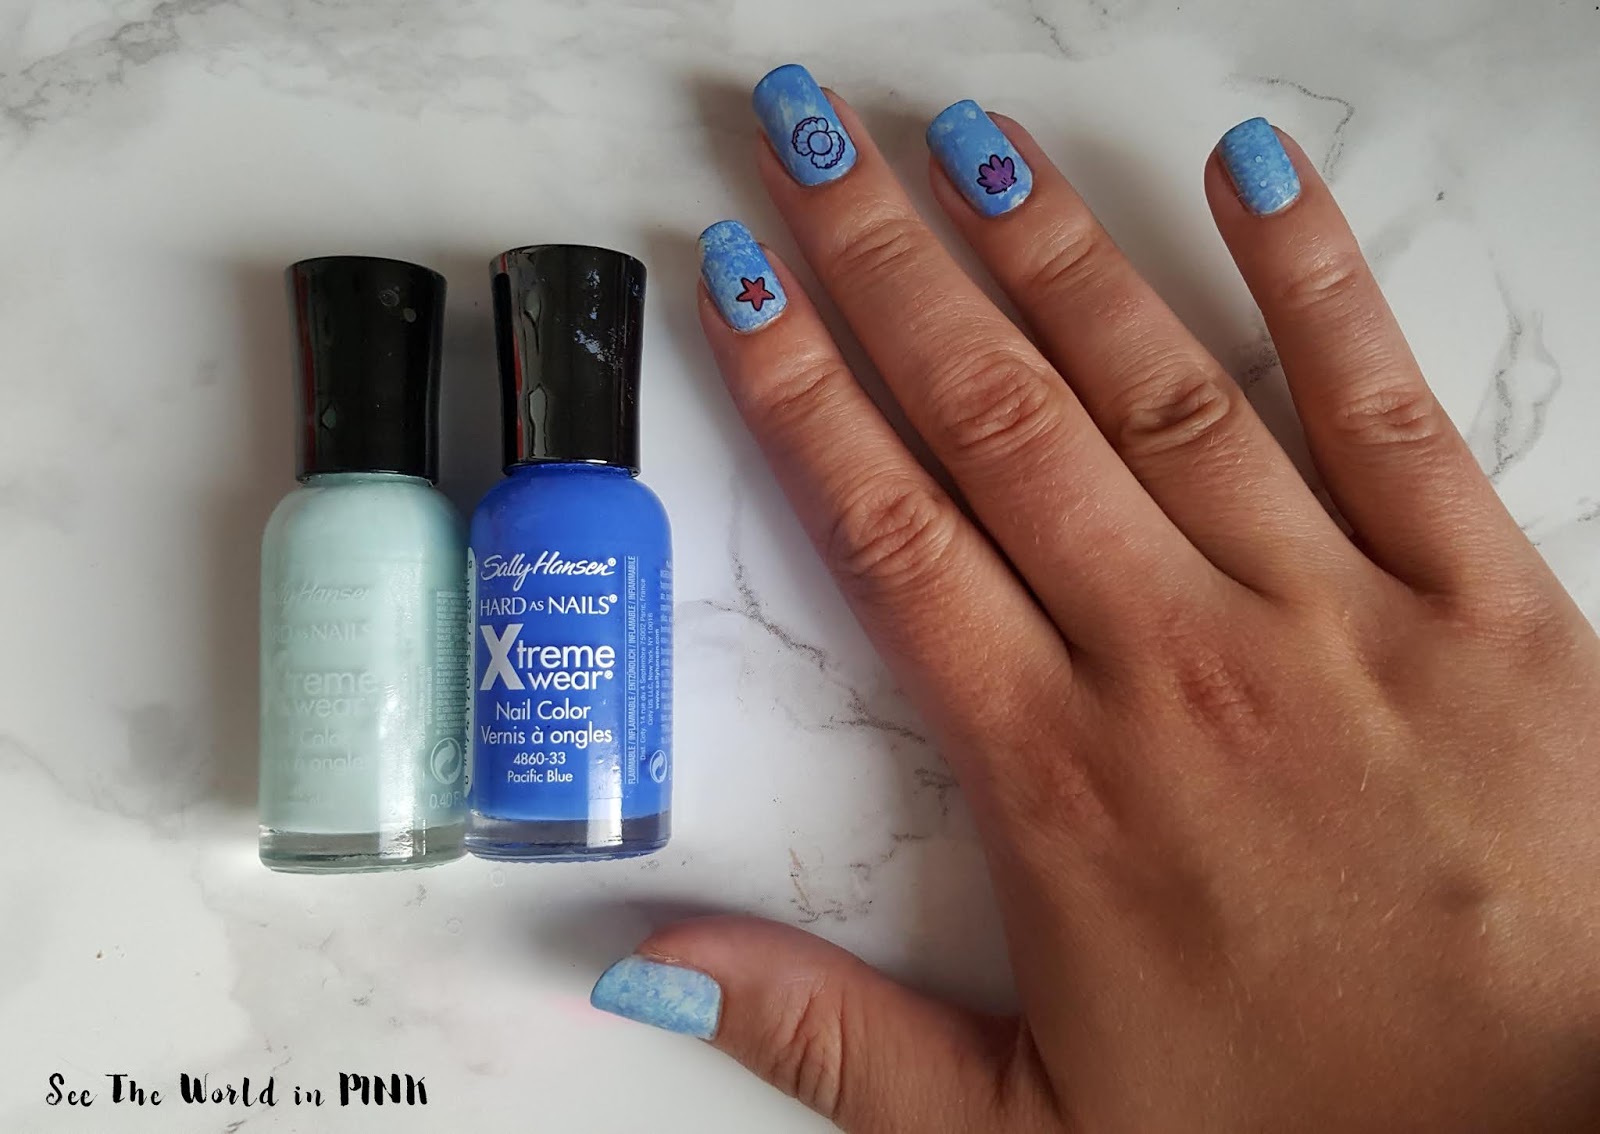 Manicure Monday - Water Spotted Nails (Water Marble Technique With Alcohol)